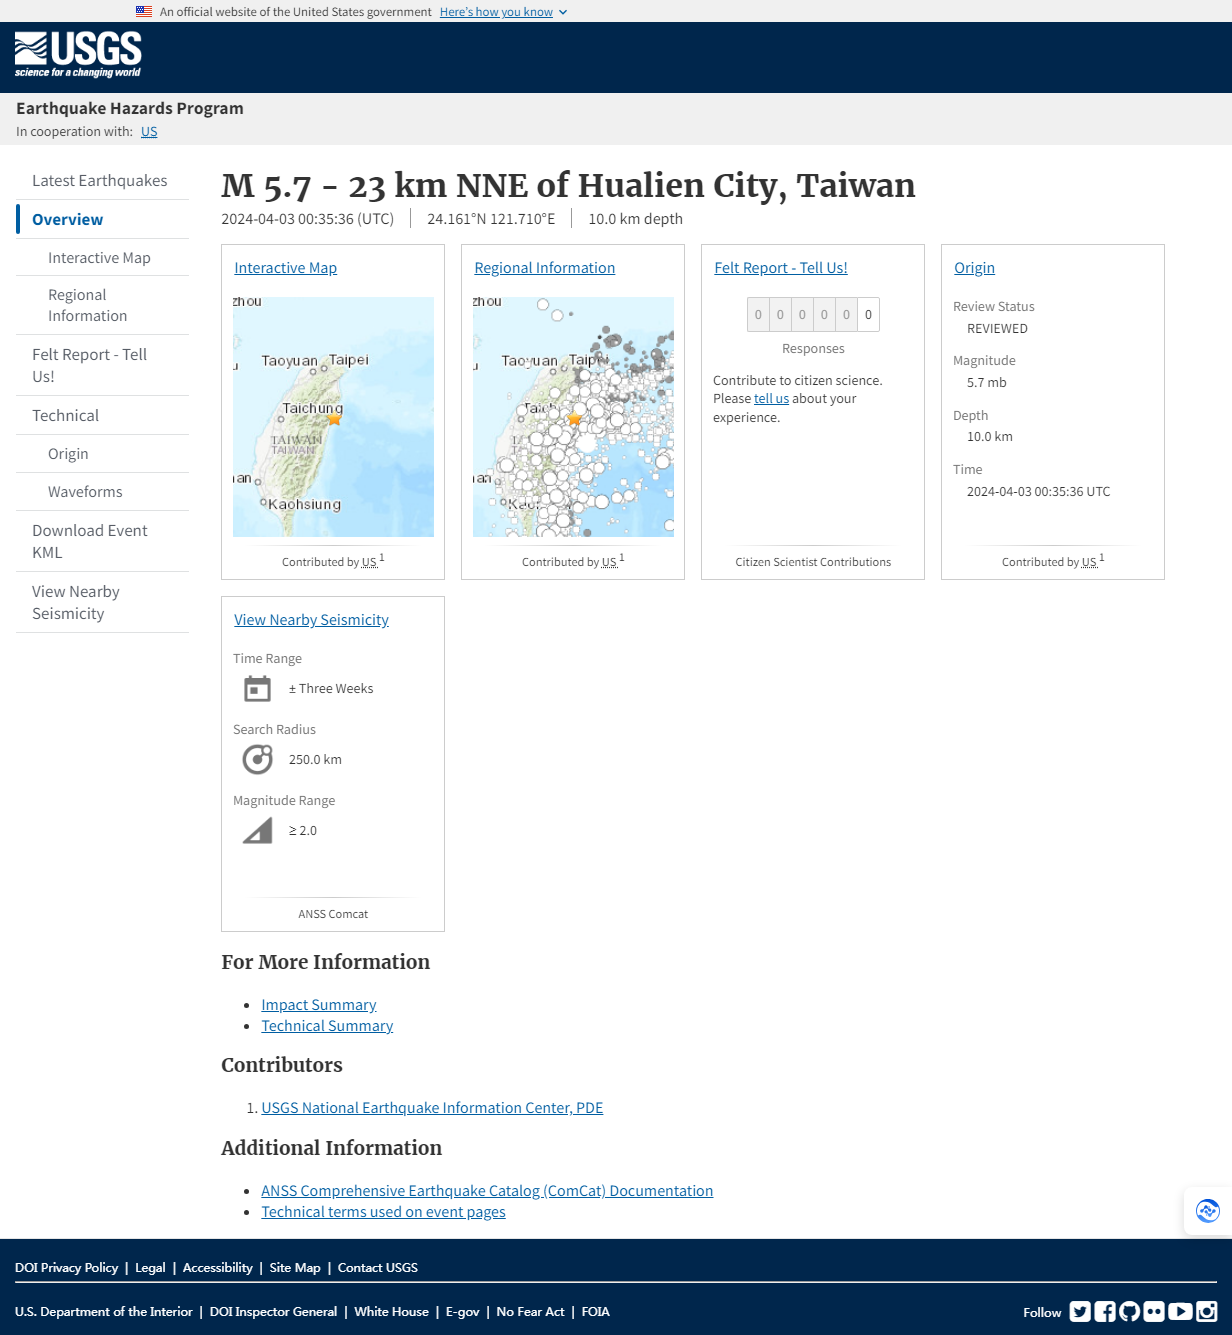 M 5.7 - 23 km NNE of Hualien City, Taiwan.png